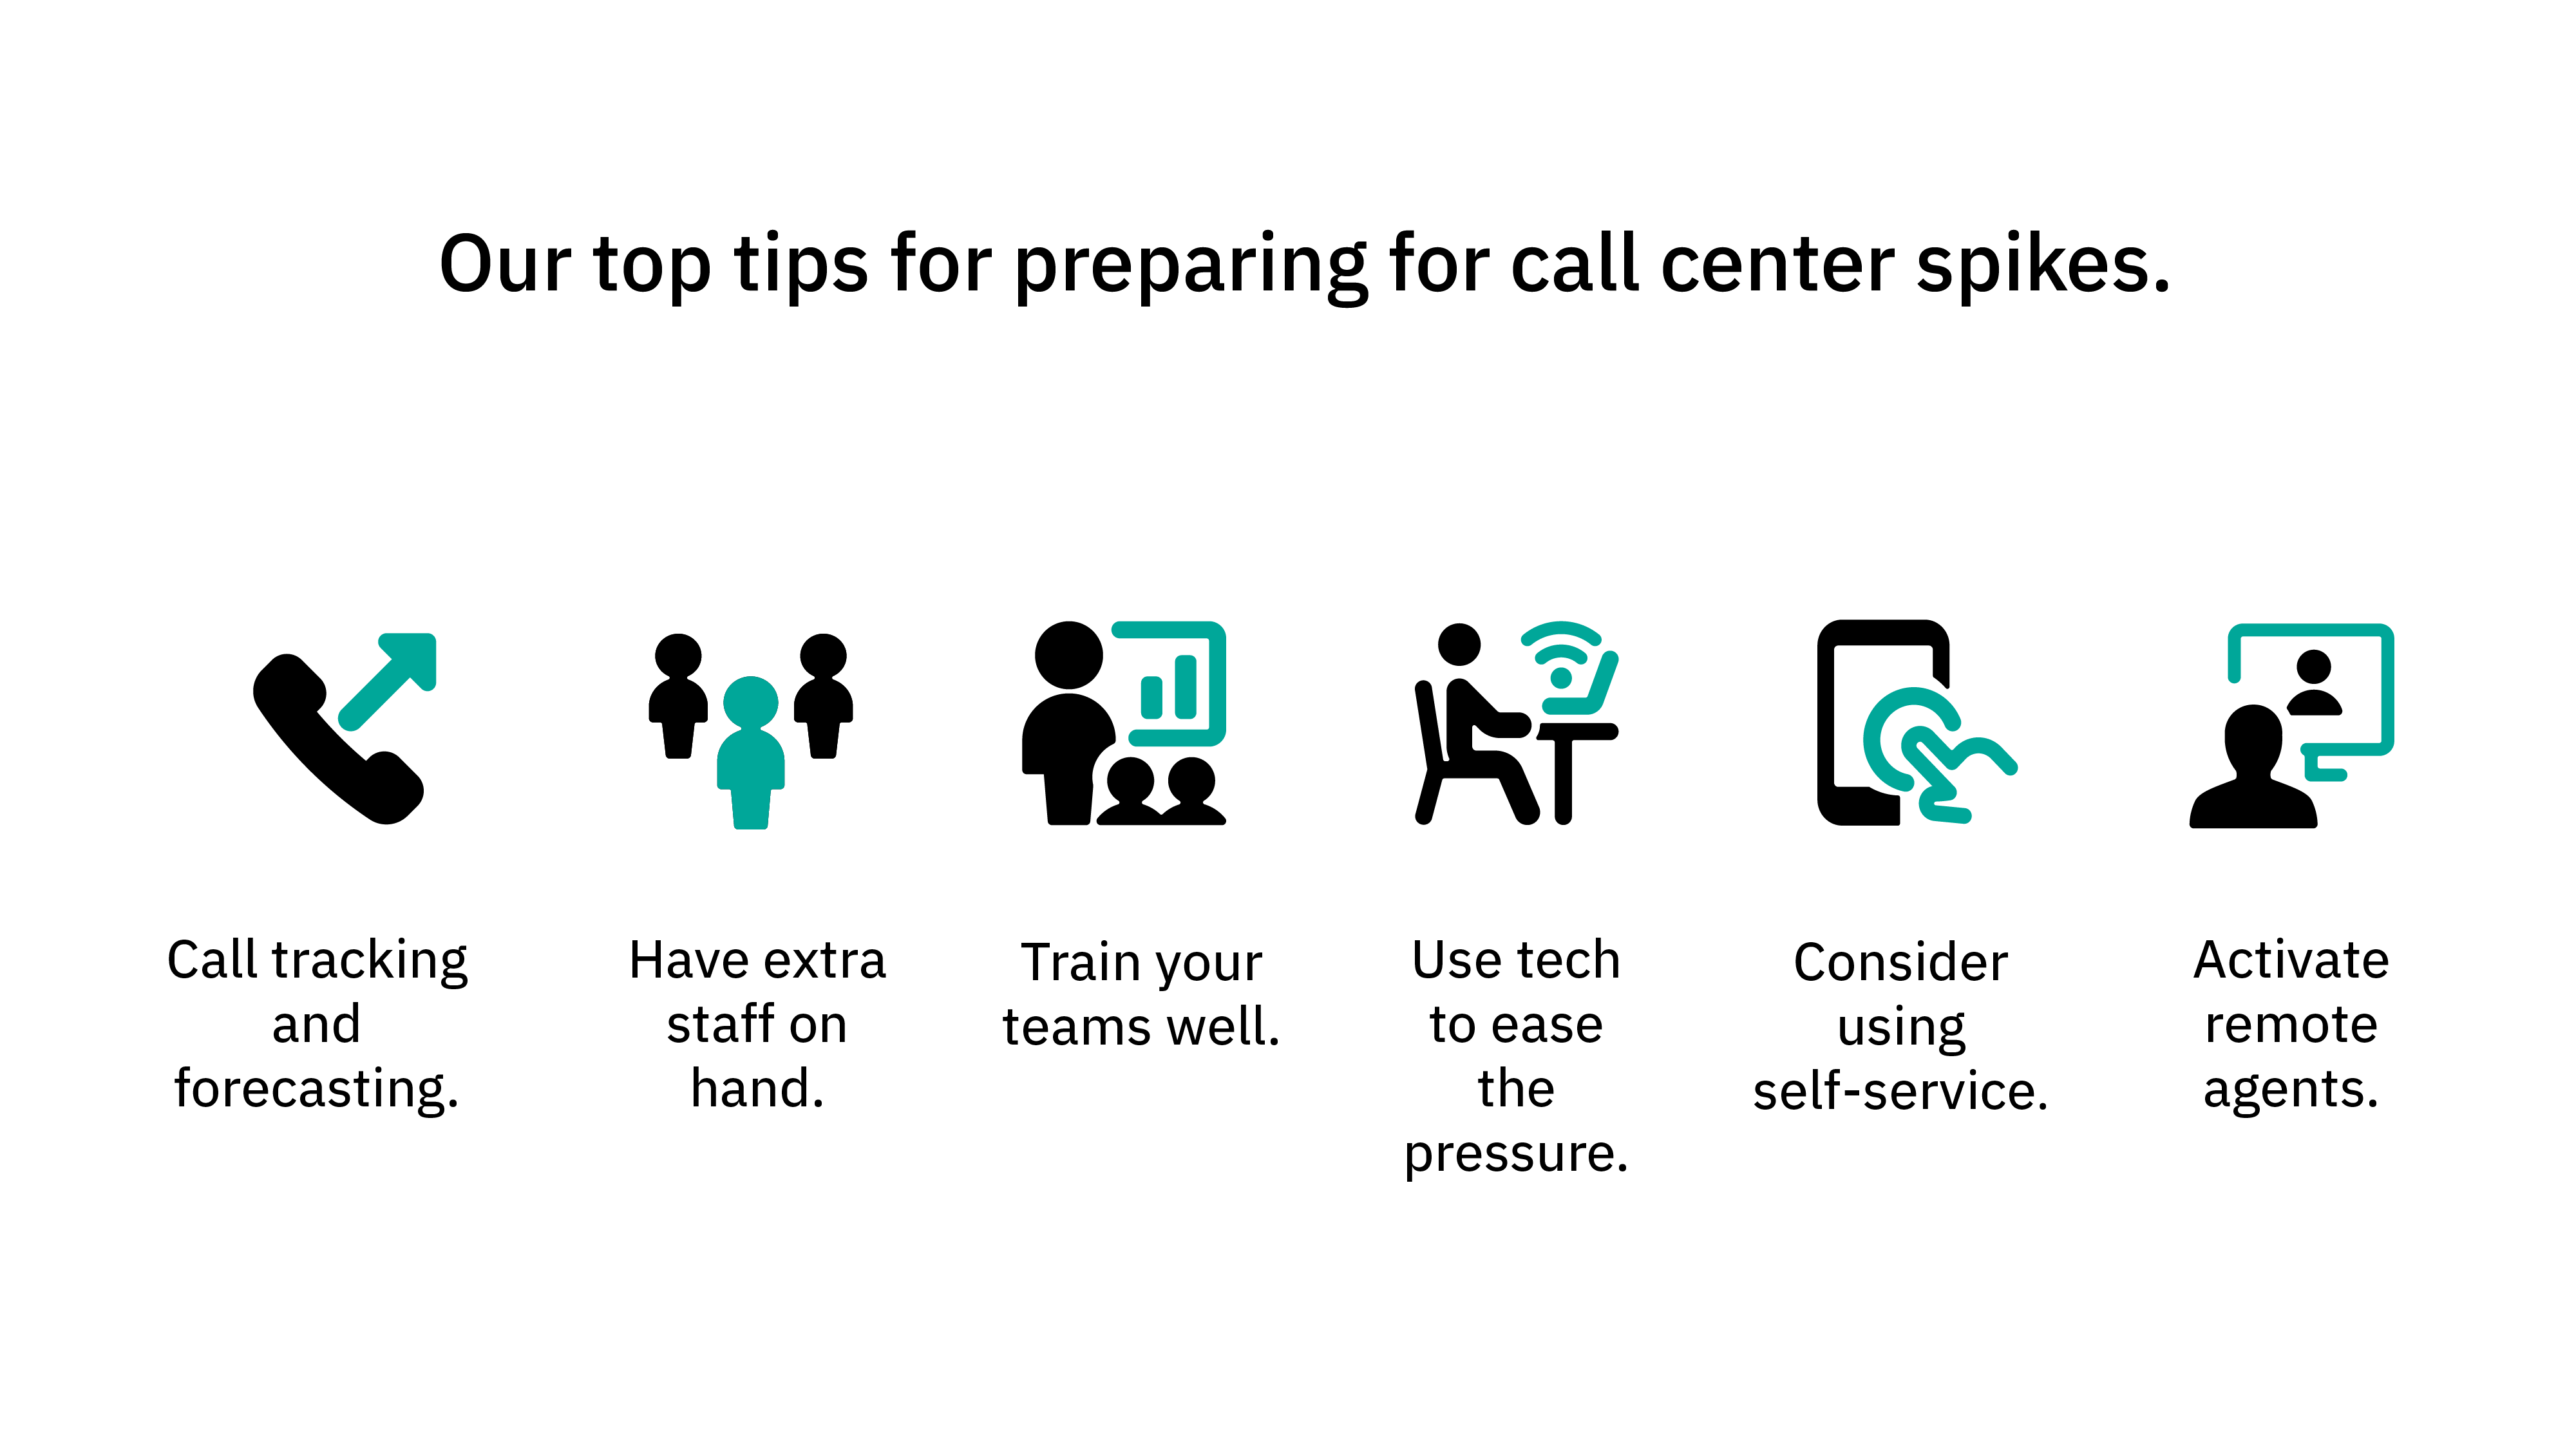 Top tips for preparing for call center spikes